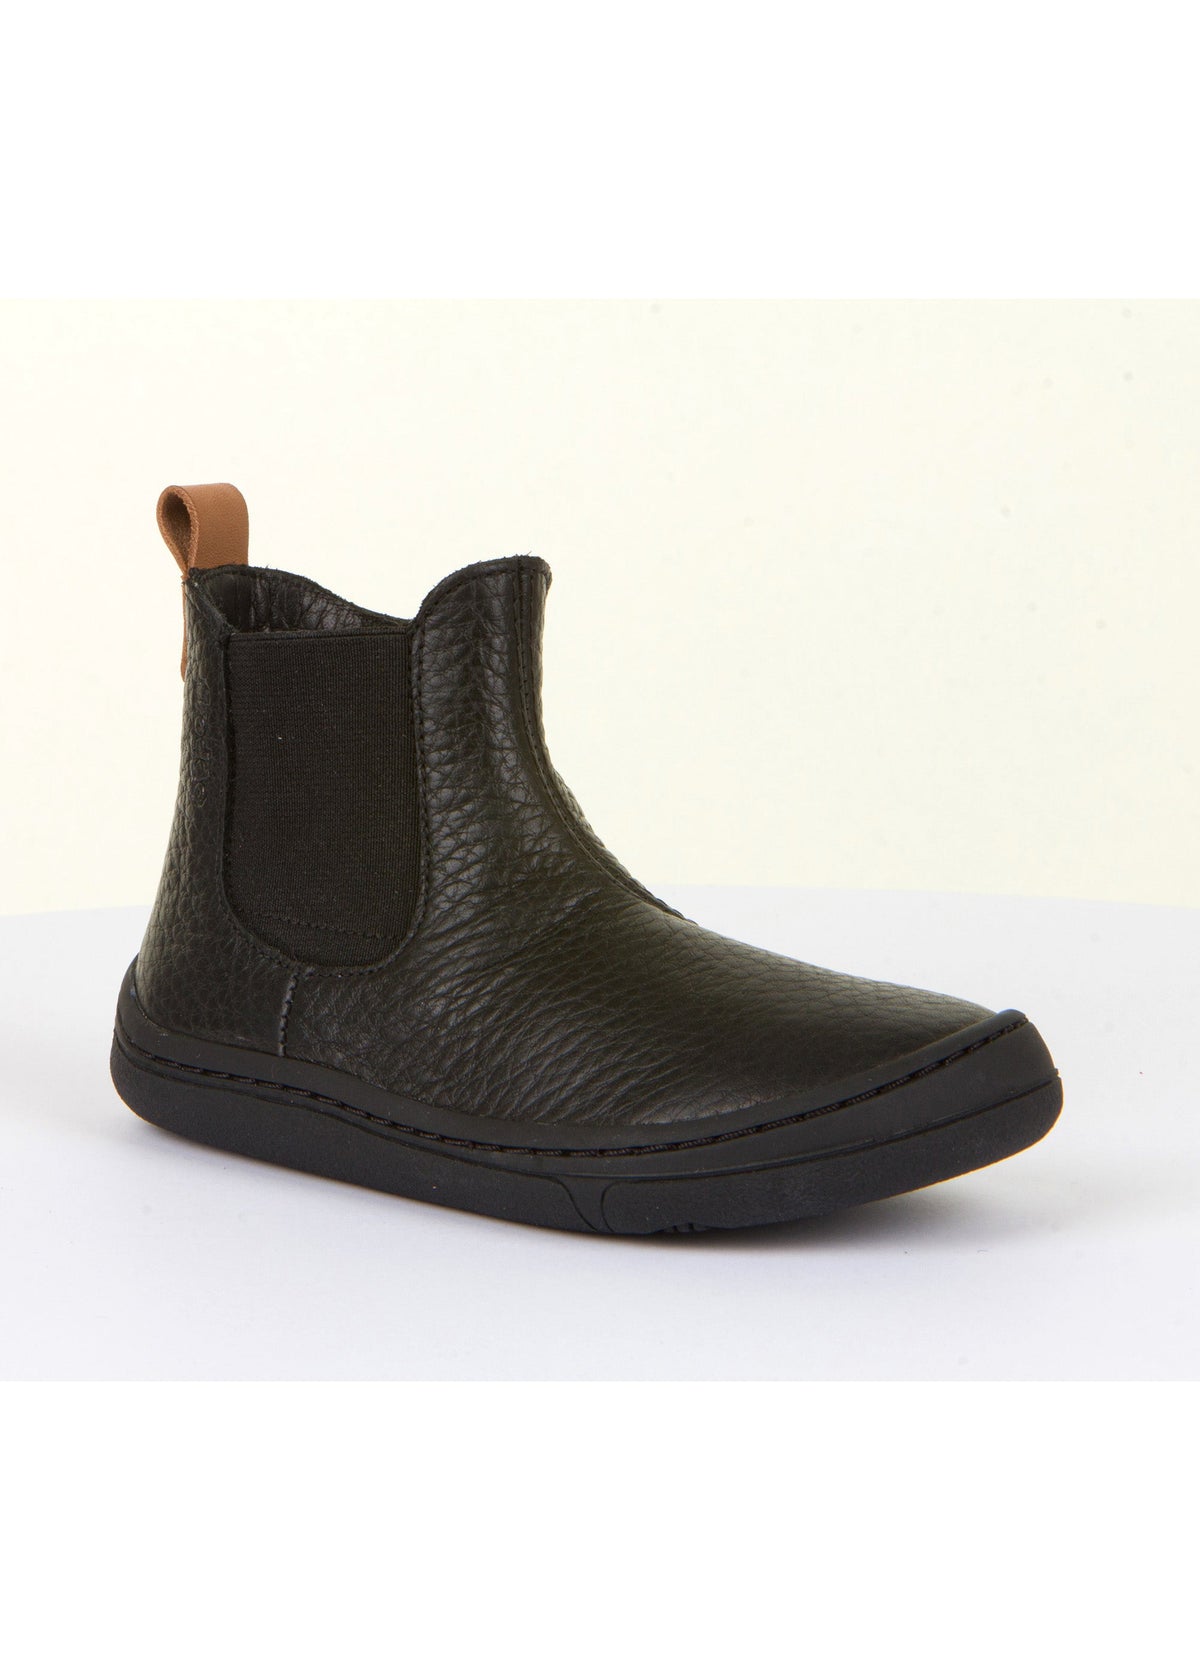 Barefoot ankle boots - Chelys, leather lining, black